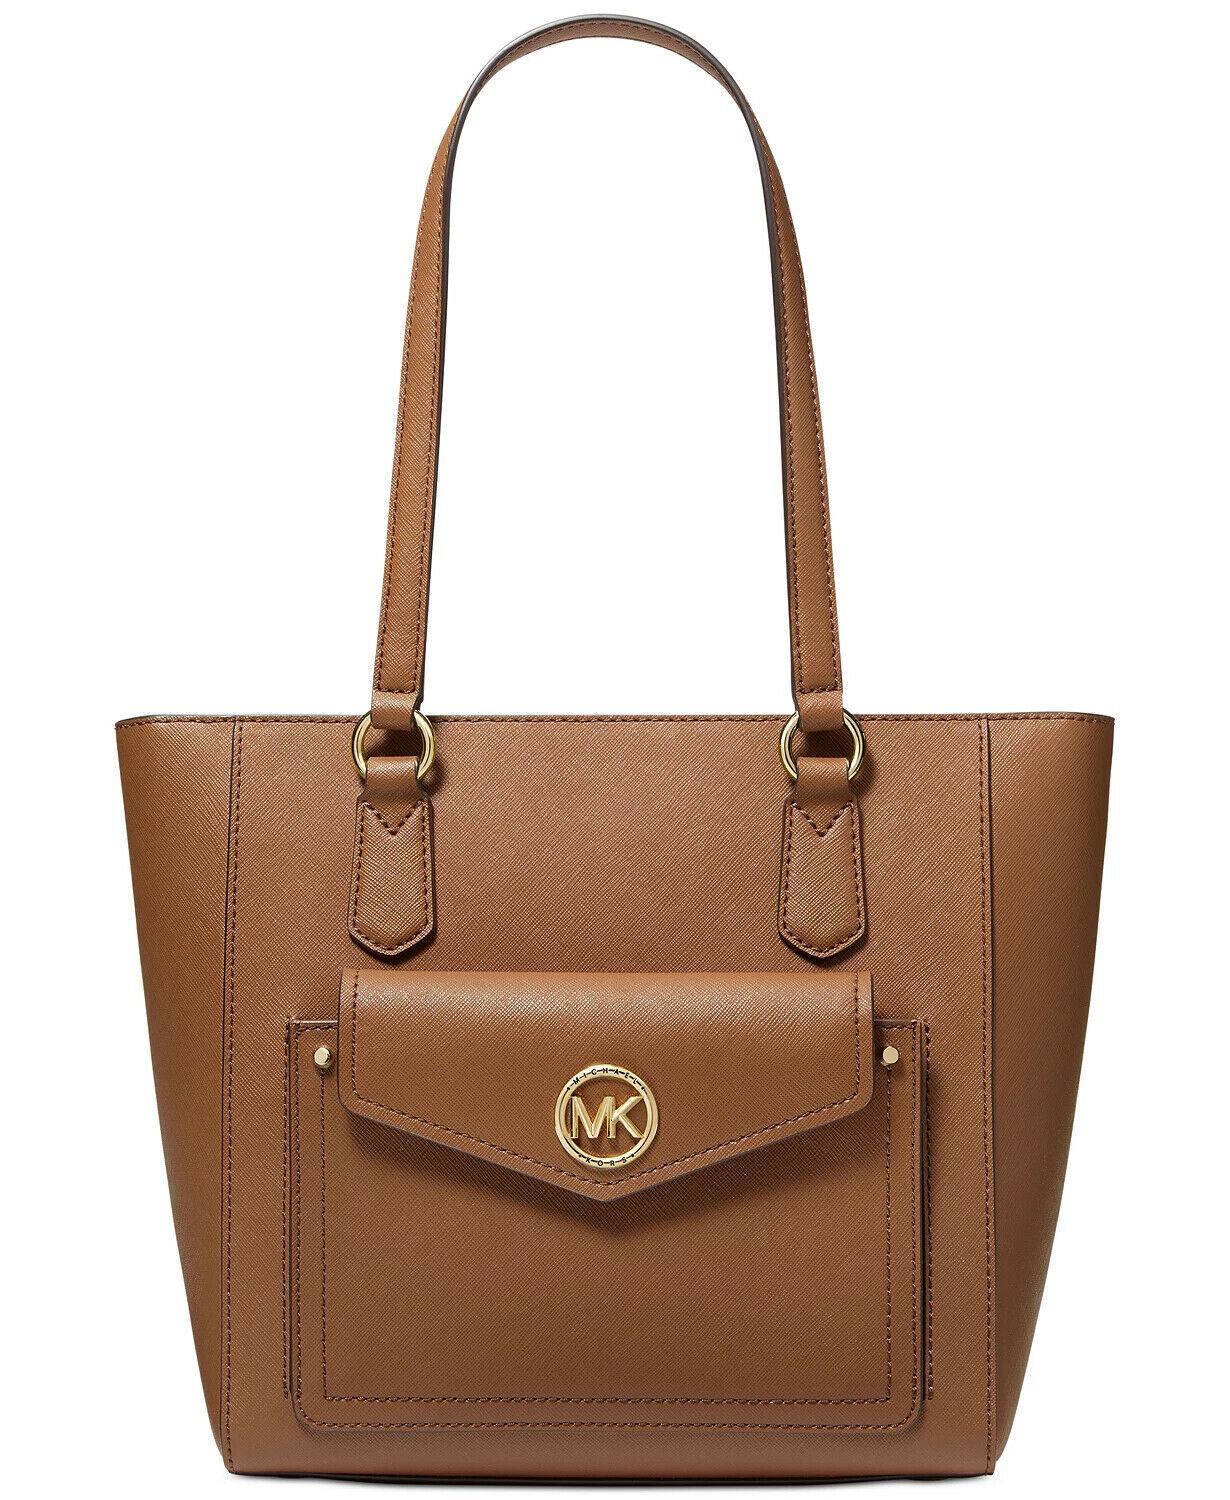 Michael Kors Women's Jet Set Travel Extra-Small Saffiano Leather Top-Zip Tote Bag - Brown